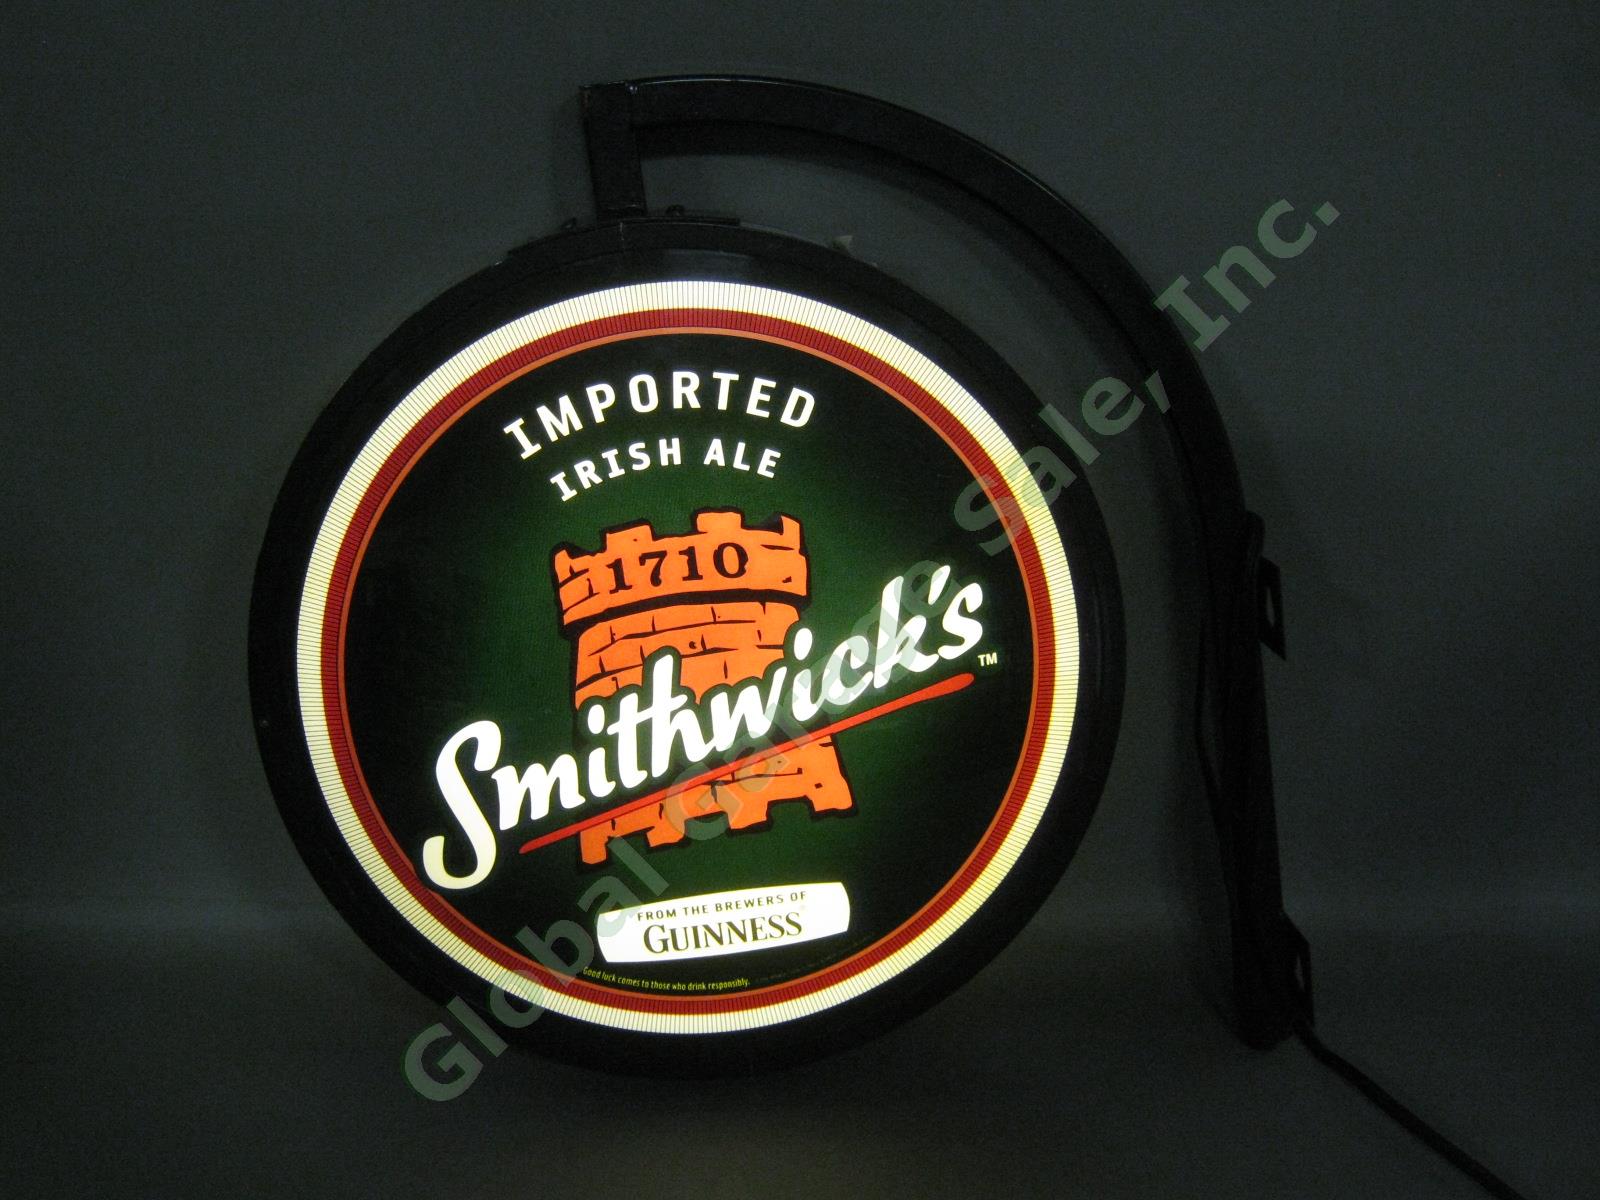 Smithwicks Imported Irish Ale 2 Sided Light Sign Pub Bar Man Cave Guinness Beer